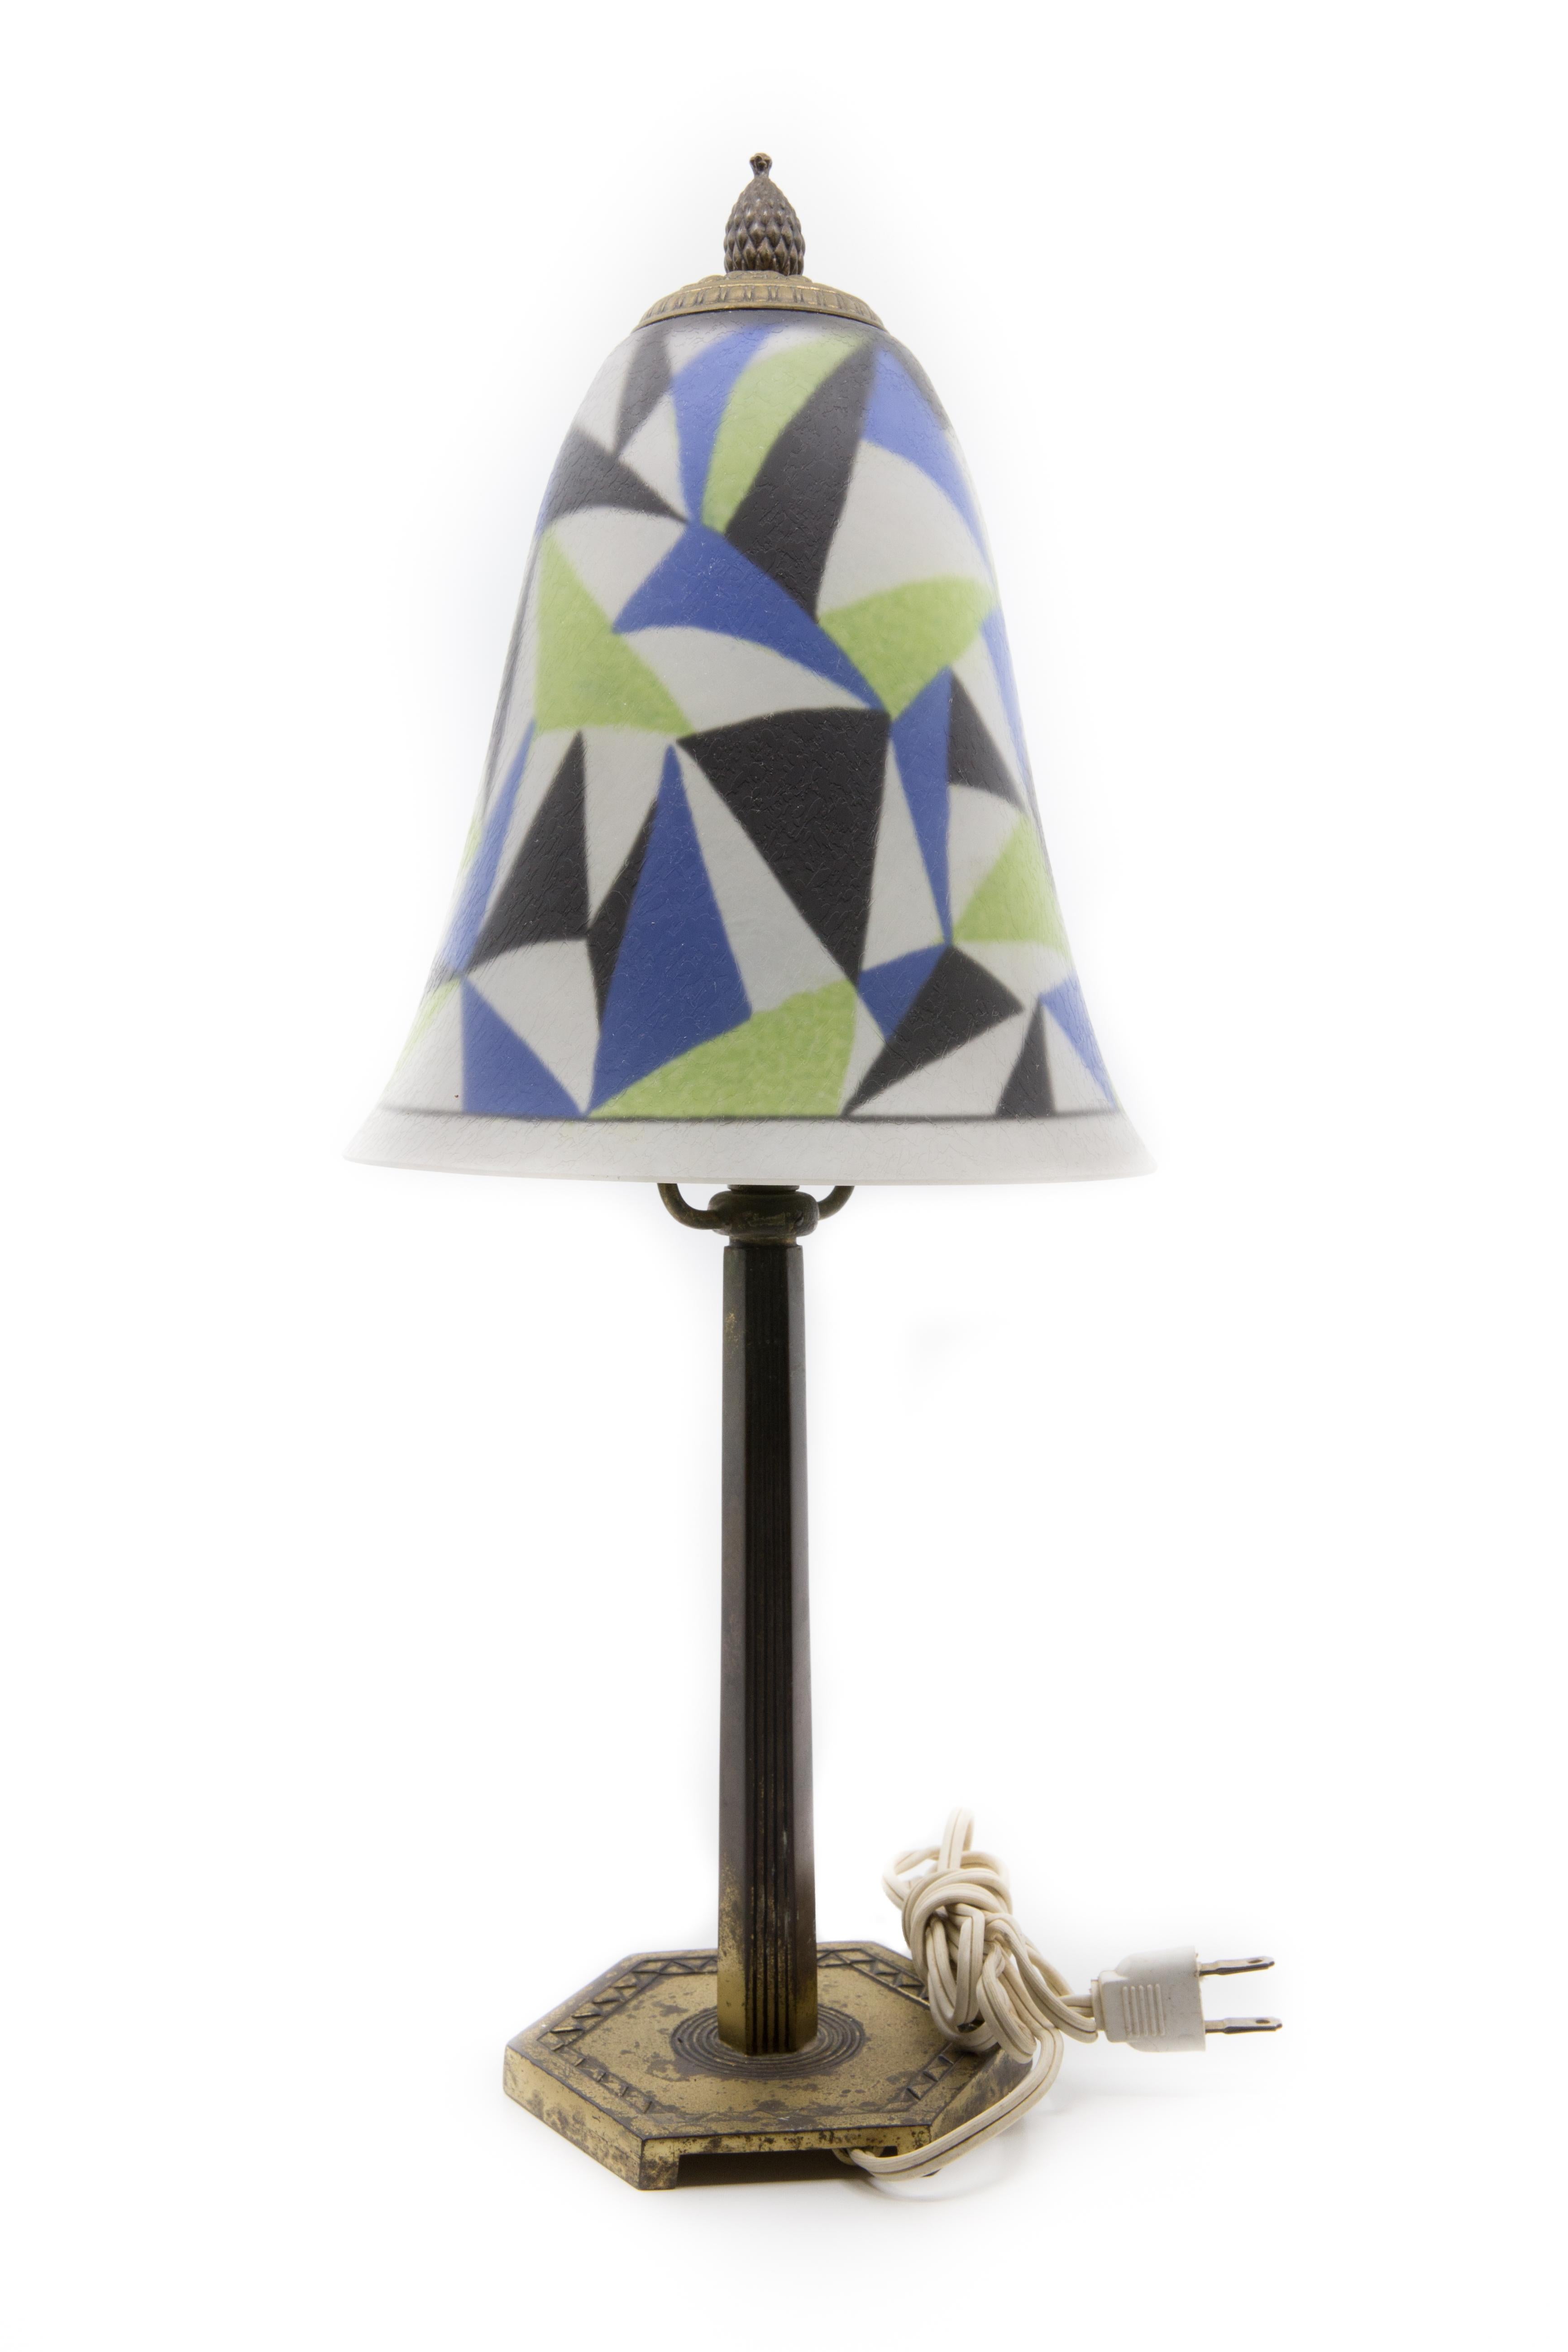 Offered is a rare signed art deco reverse painted Pairpoint desk lamp, circa 1925. The etched reverse painted lamp shade is painted on the reverse with geometric designs. It is mounted on a geometric form bronzed base. The lamp is signed shade and